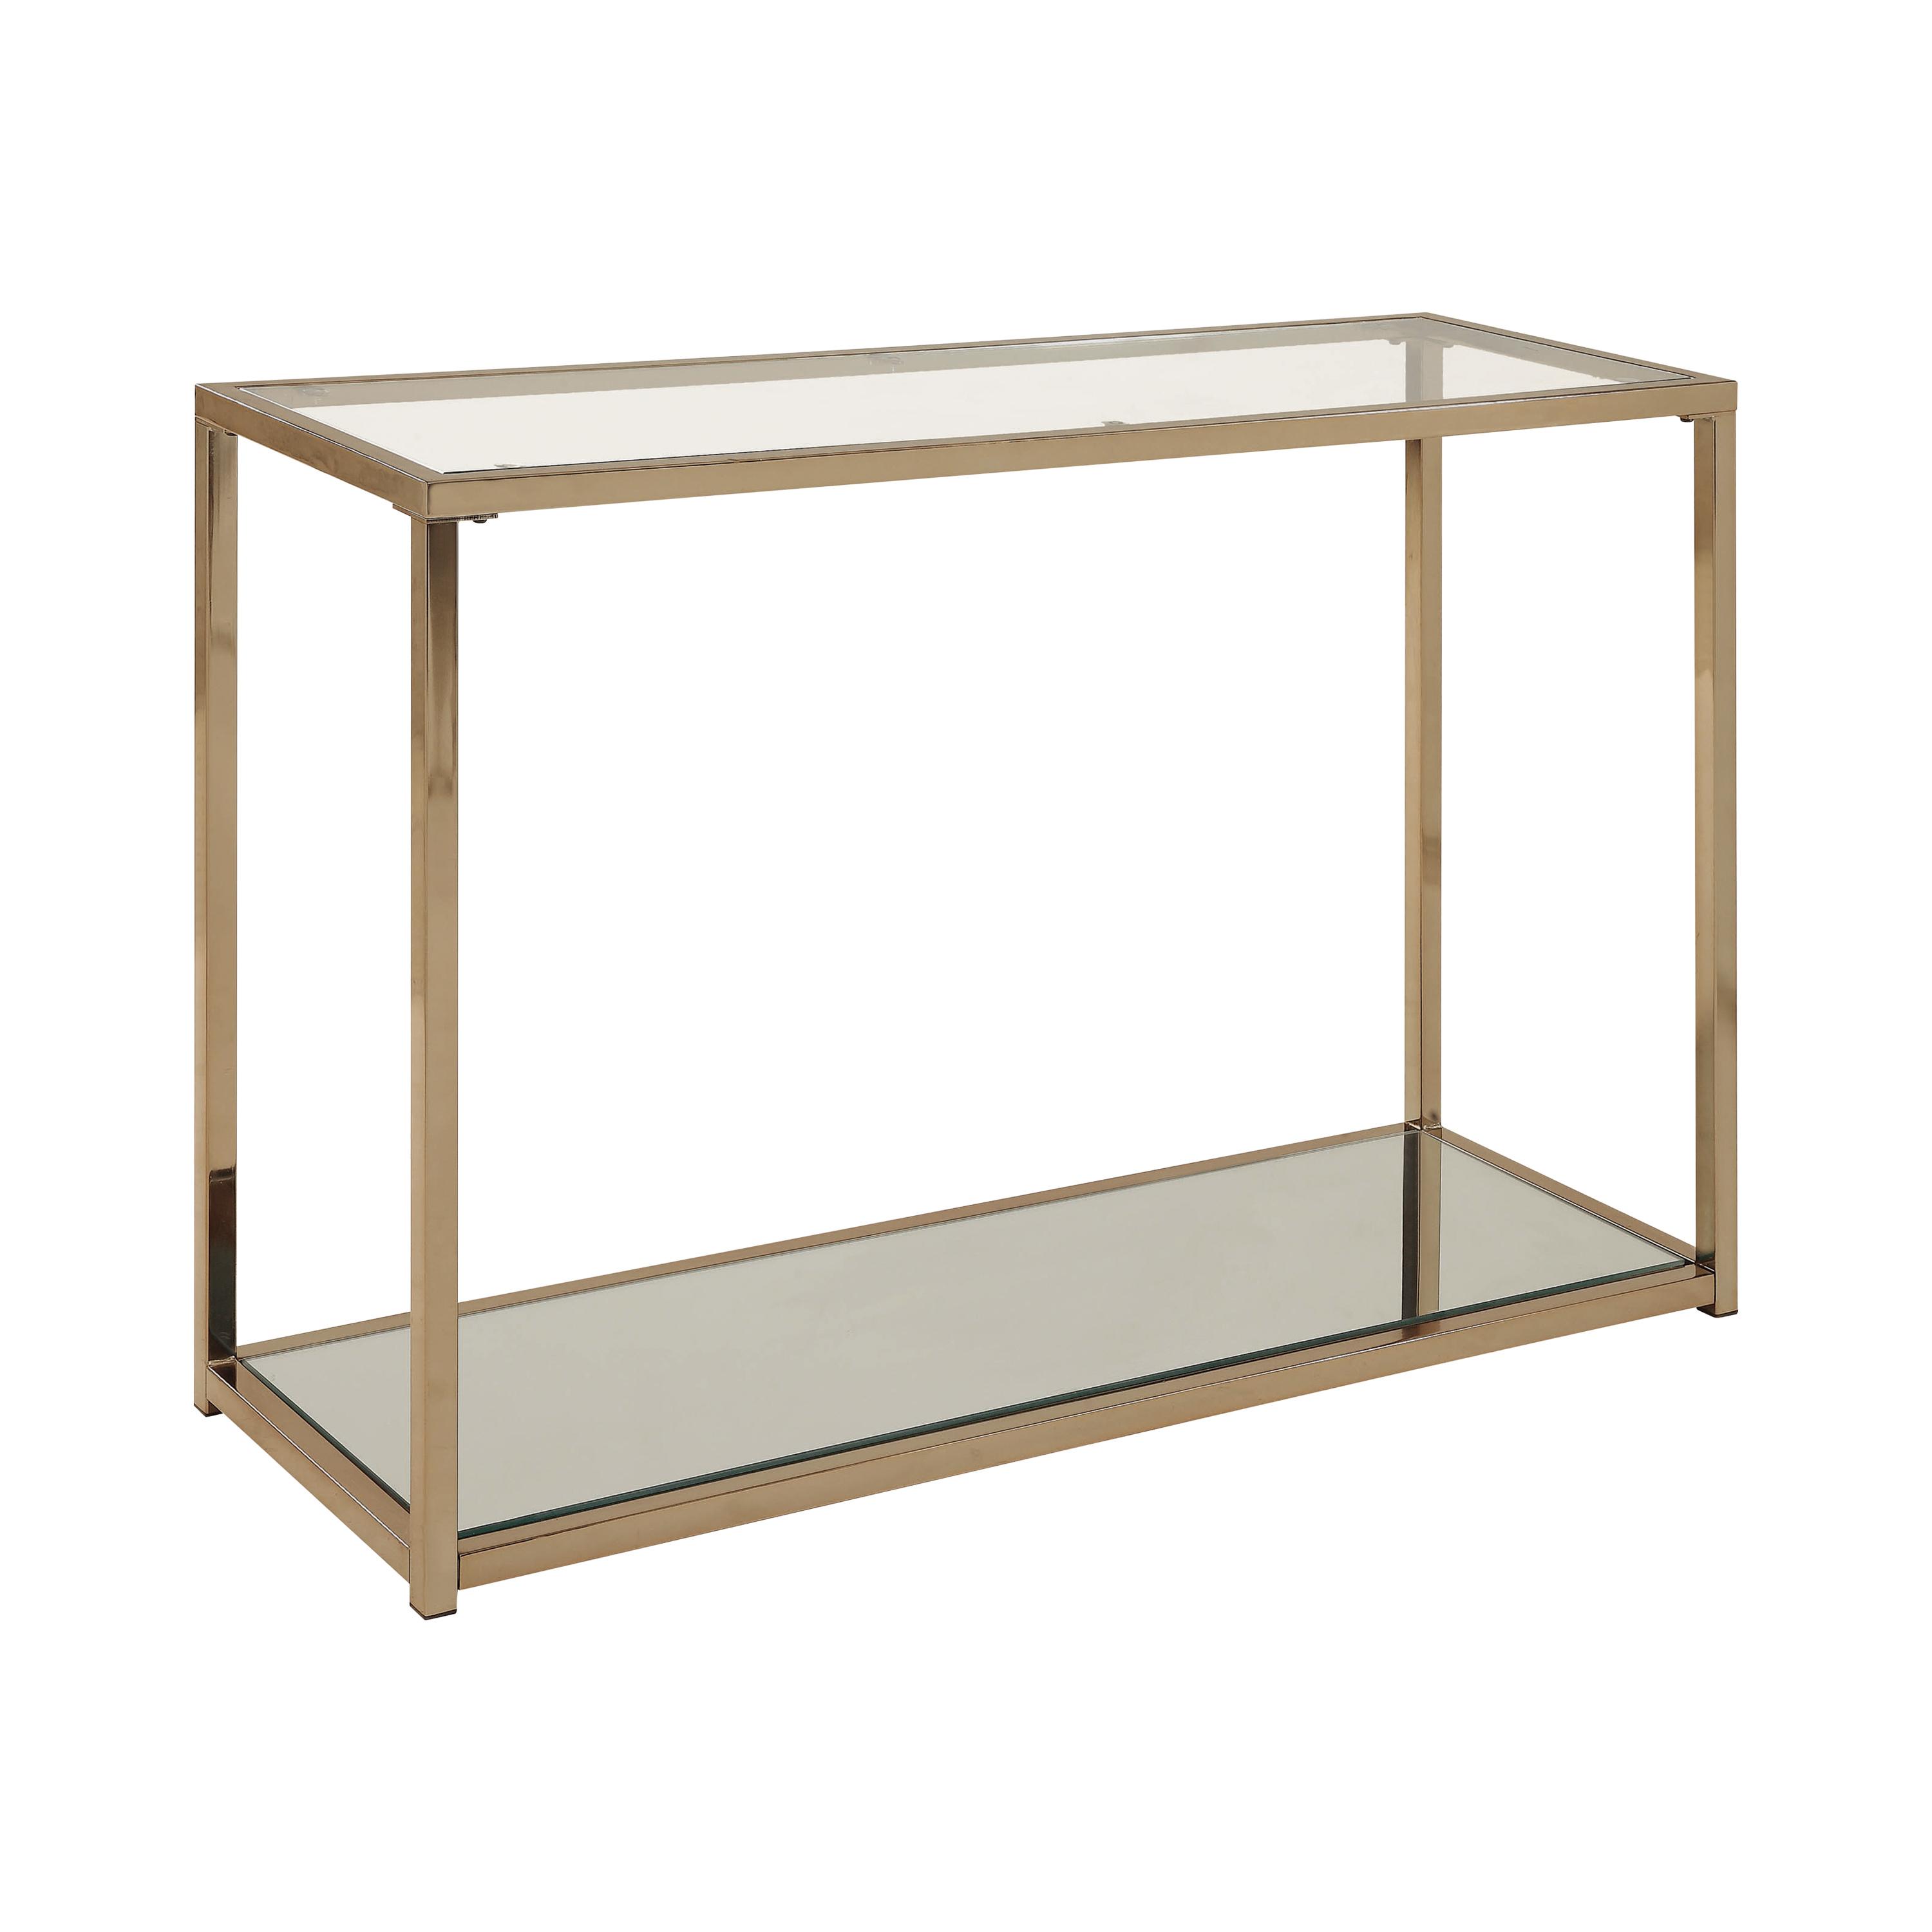 Transitional Sofa Table 705239 705239 in Chrome 